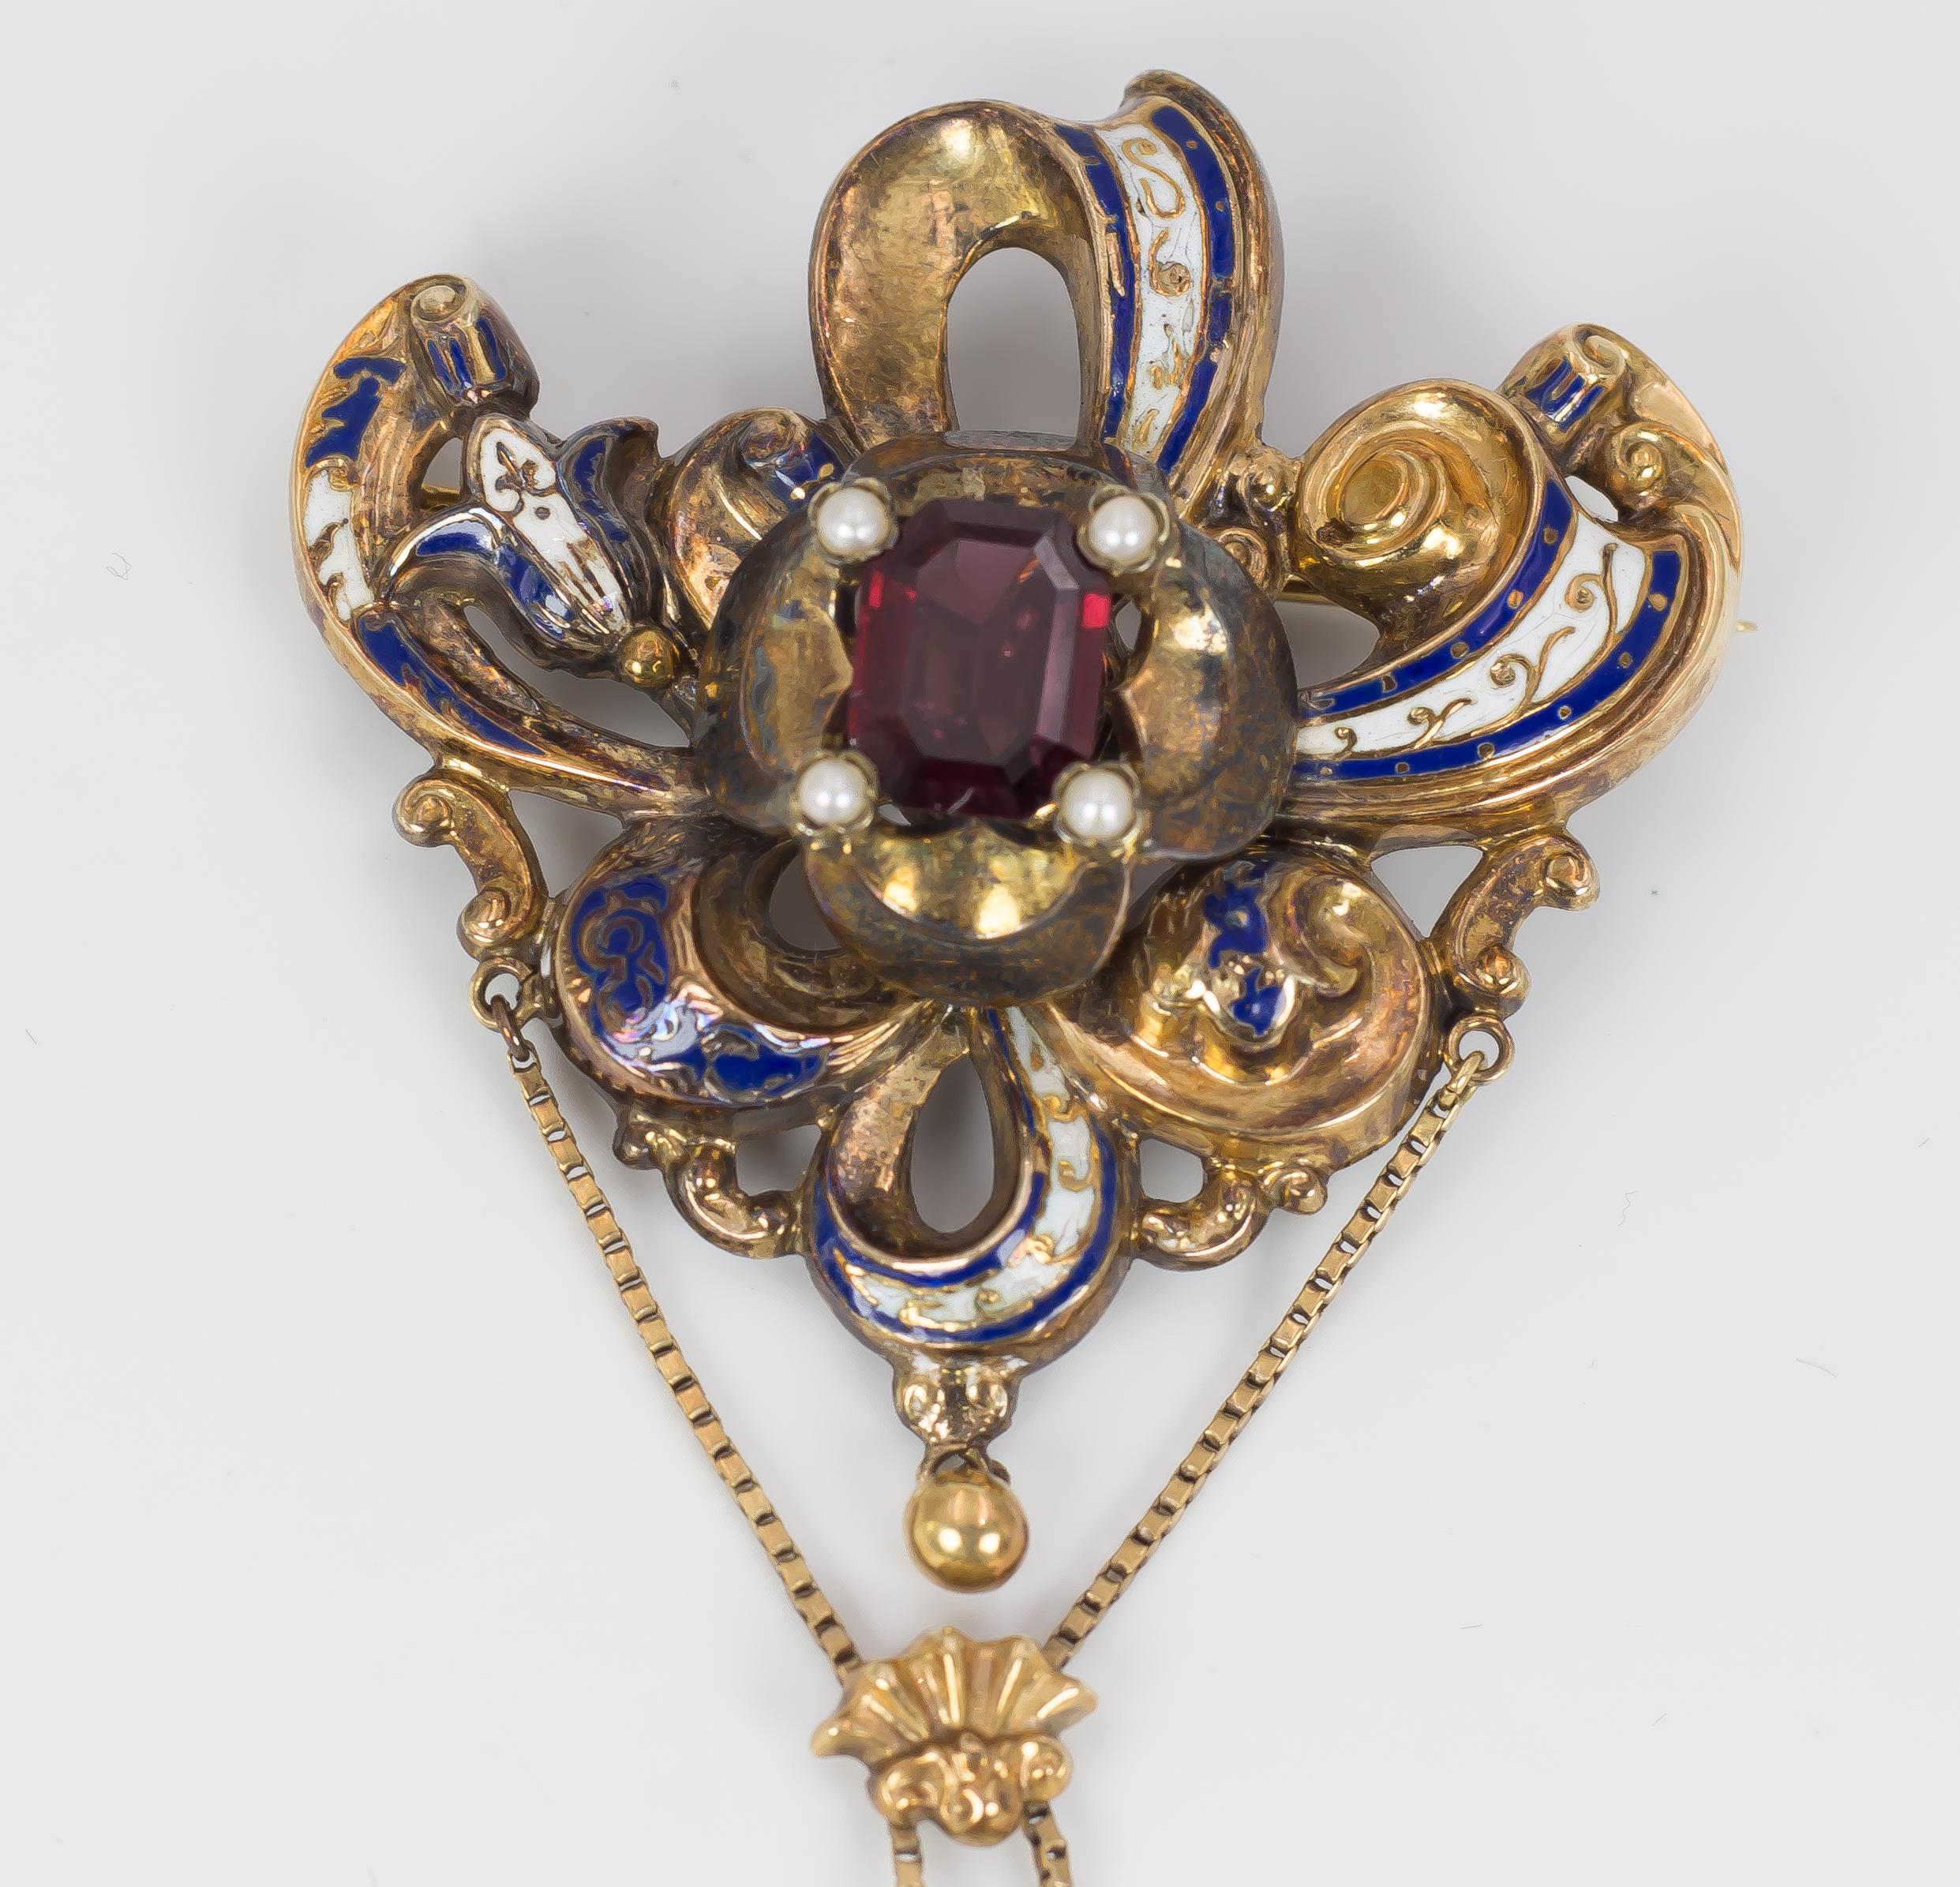 A very elegant antique brooch, dating from the Second Half of the 19th Century, set with a central garnet and four beads; they are surrounded by a gold setting, decorated with white and blue enamels; a gold pendant gives a pretty movement to this